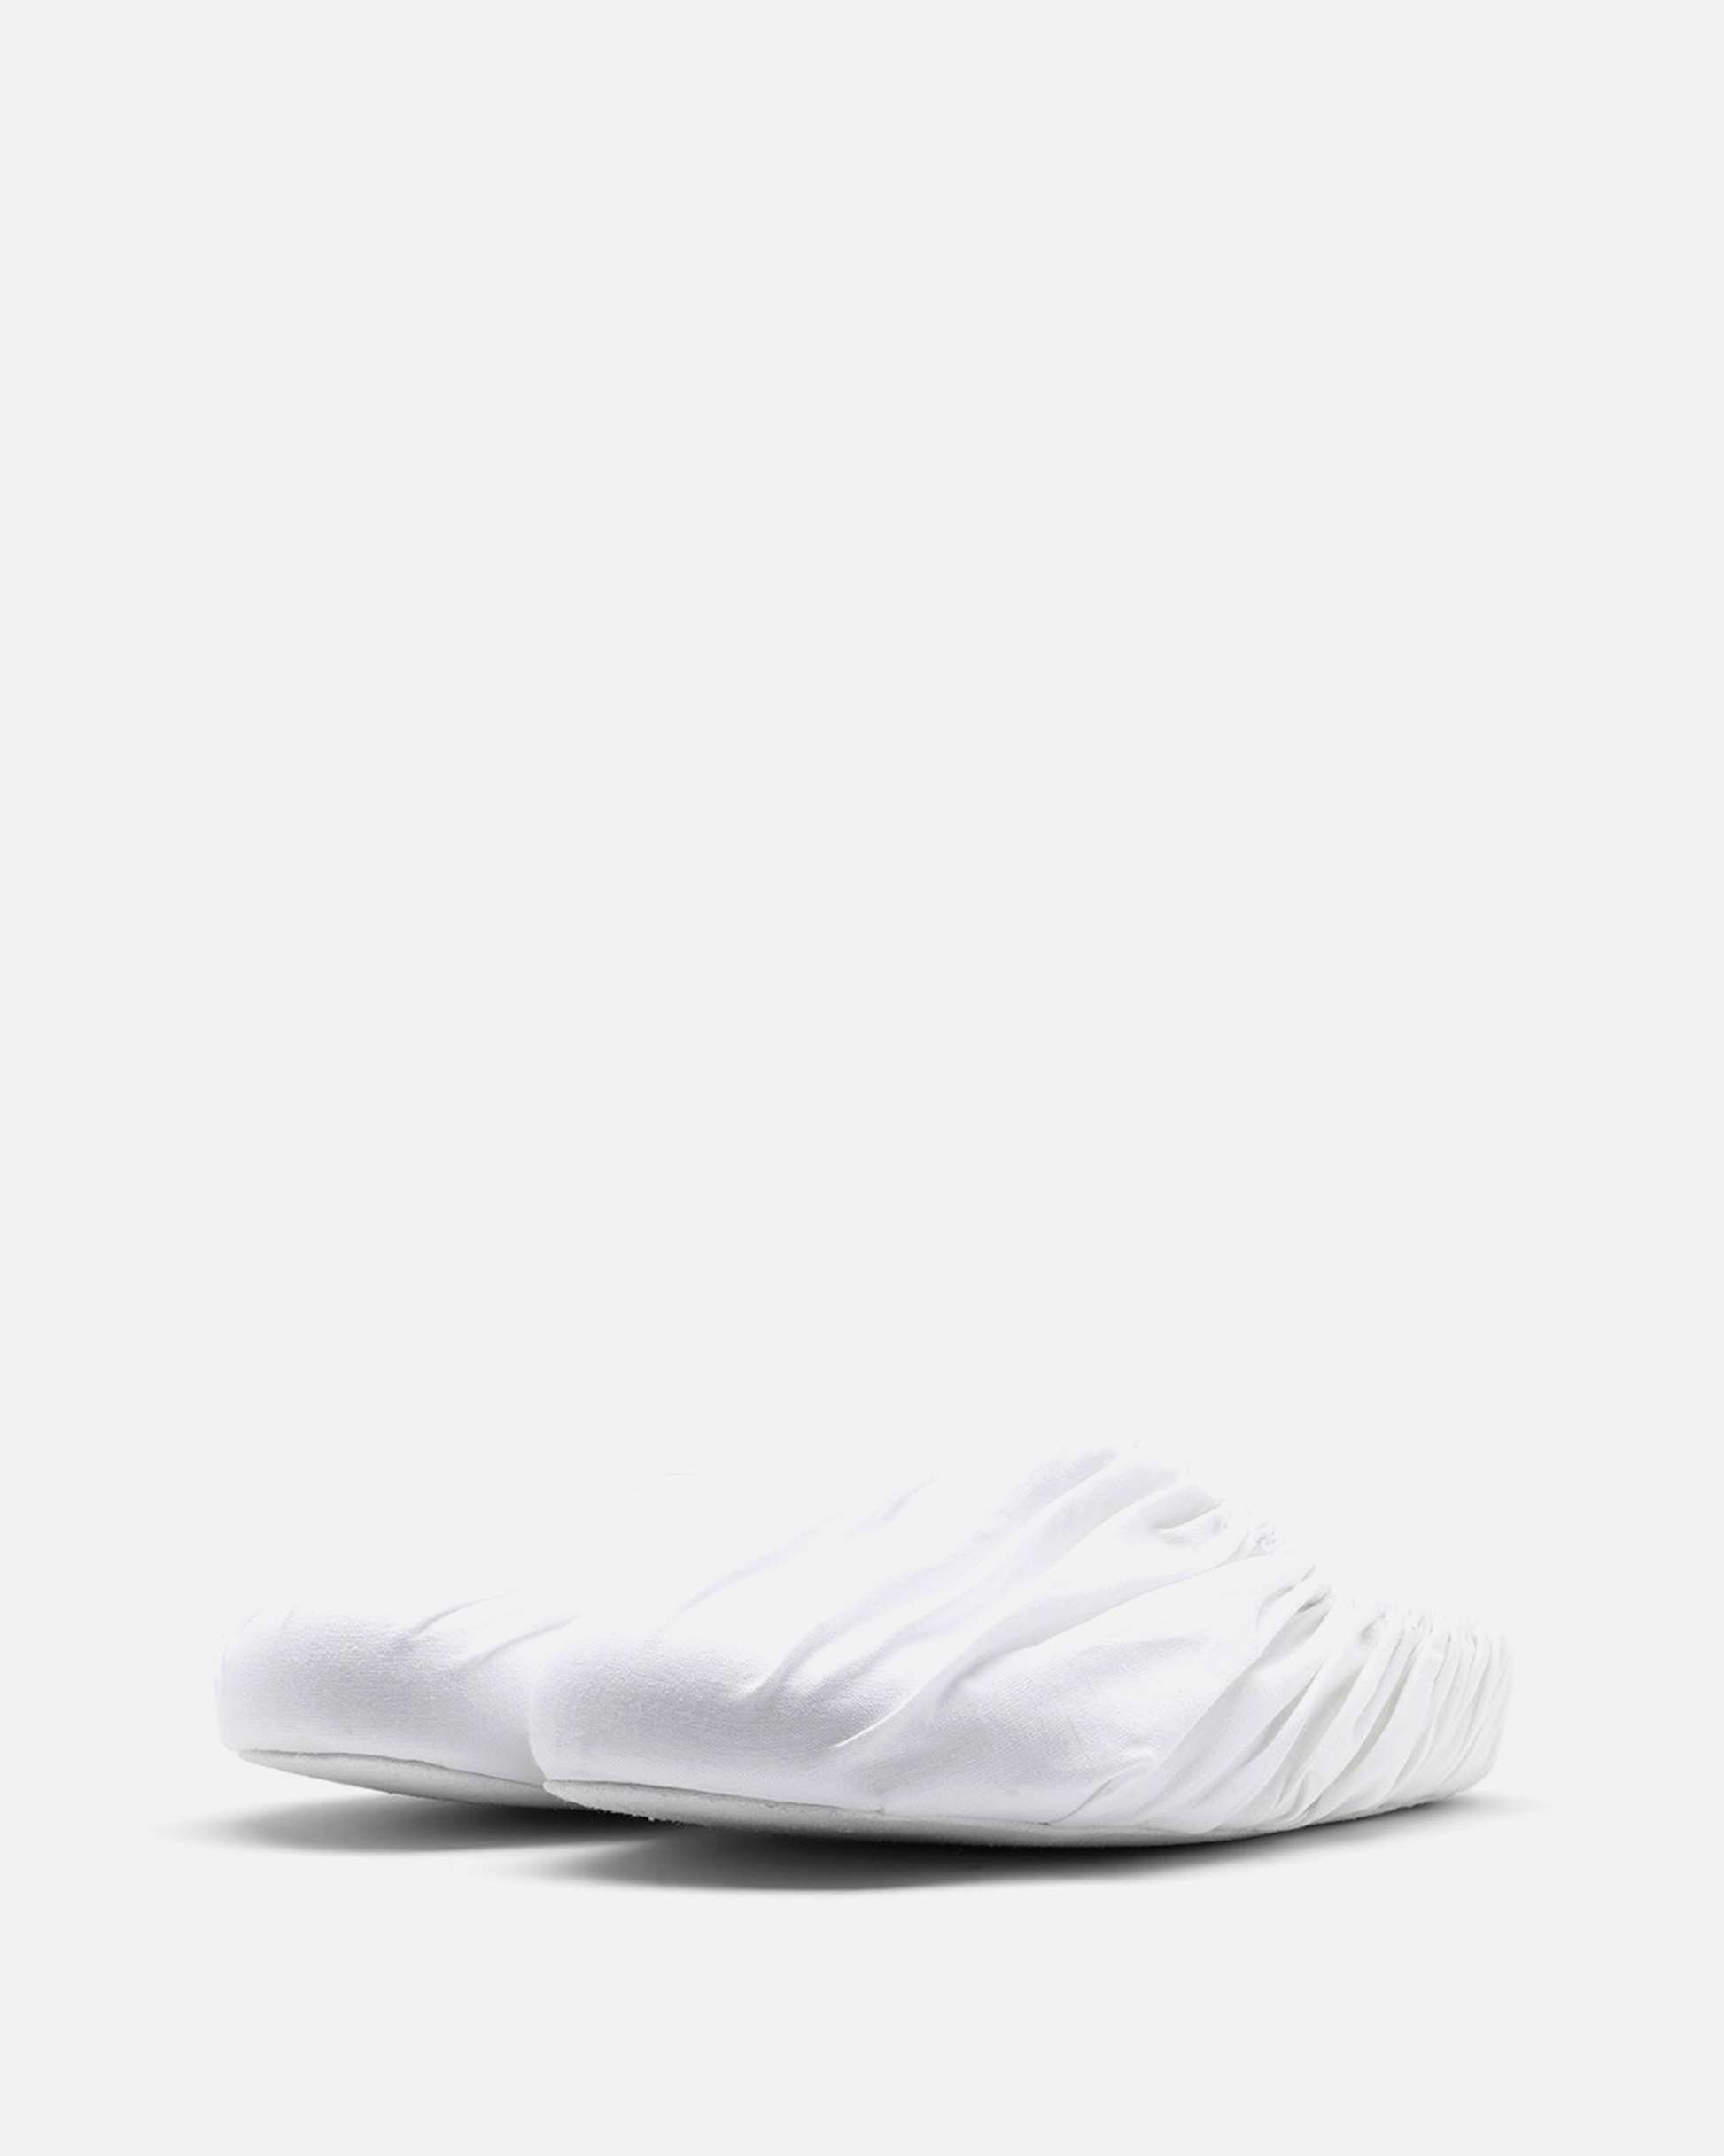 Maison Margiela Men's Shoes Covered Cotton Slip-On Shoes in White